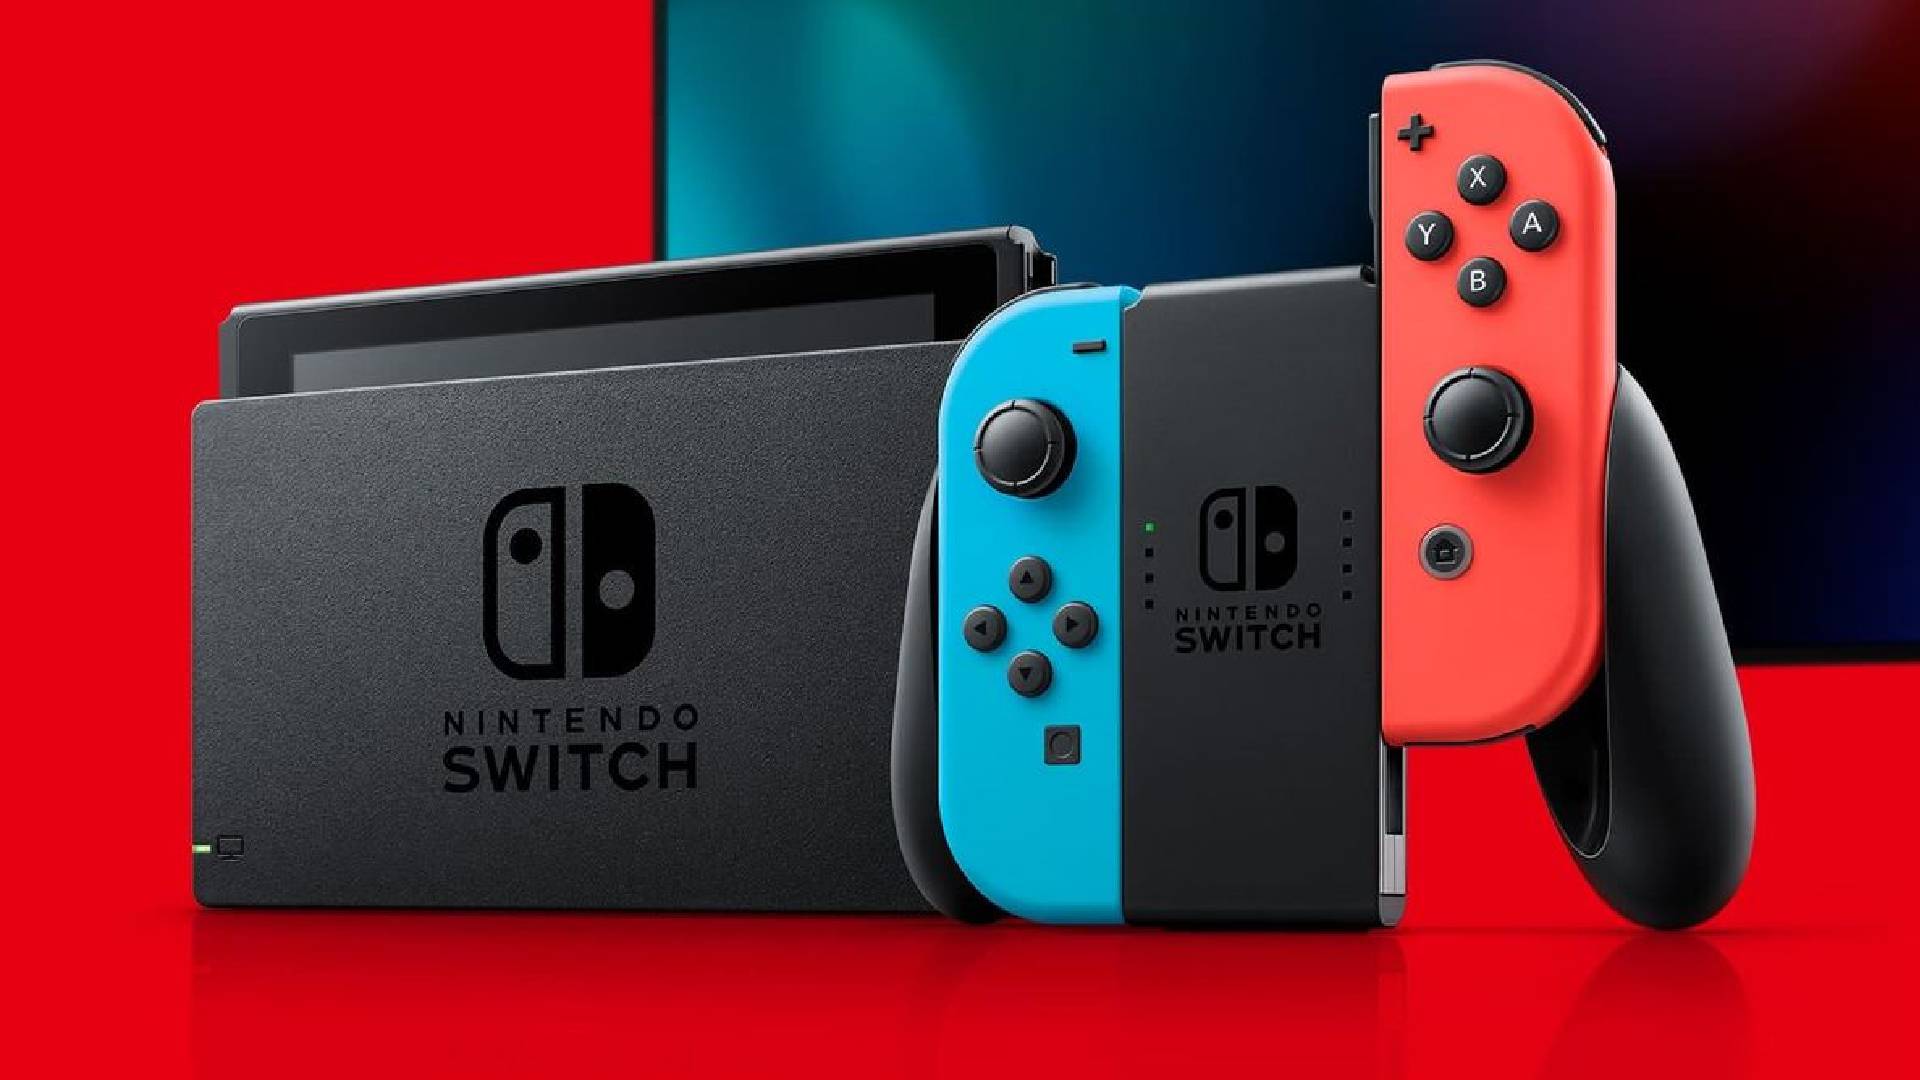 The Nintendo Switch gets a price drop in Europe